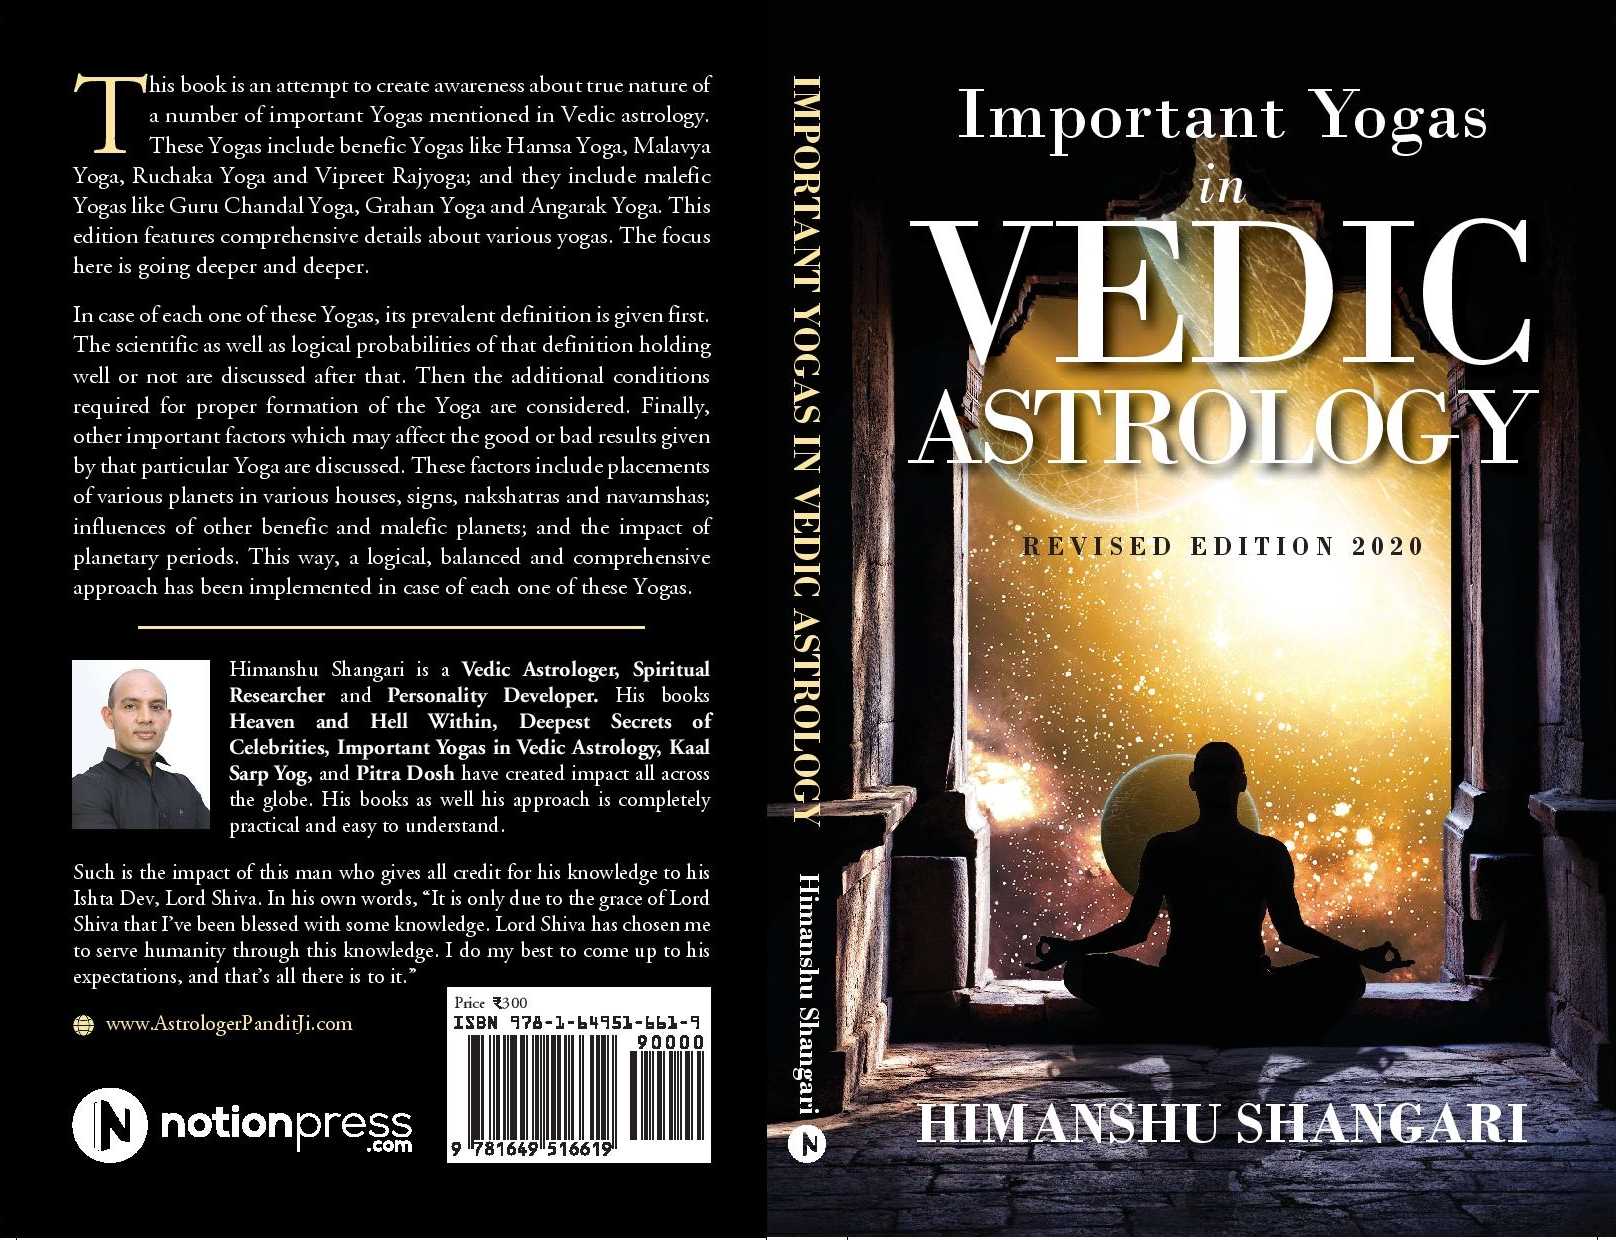 Important Yogas in Vedic Astrology Revised Edition 2020